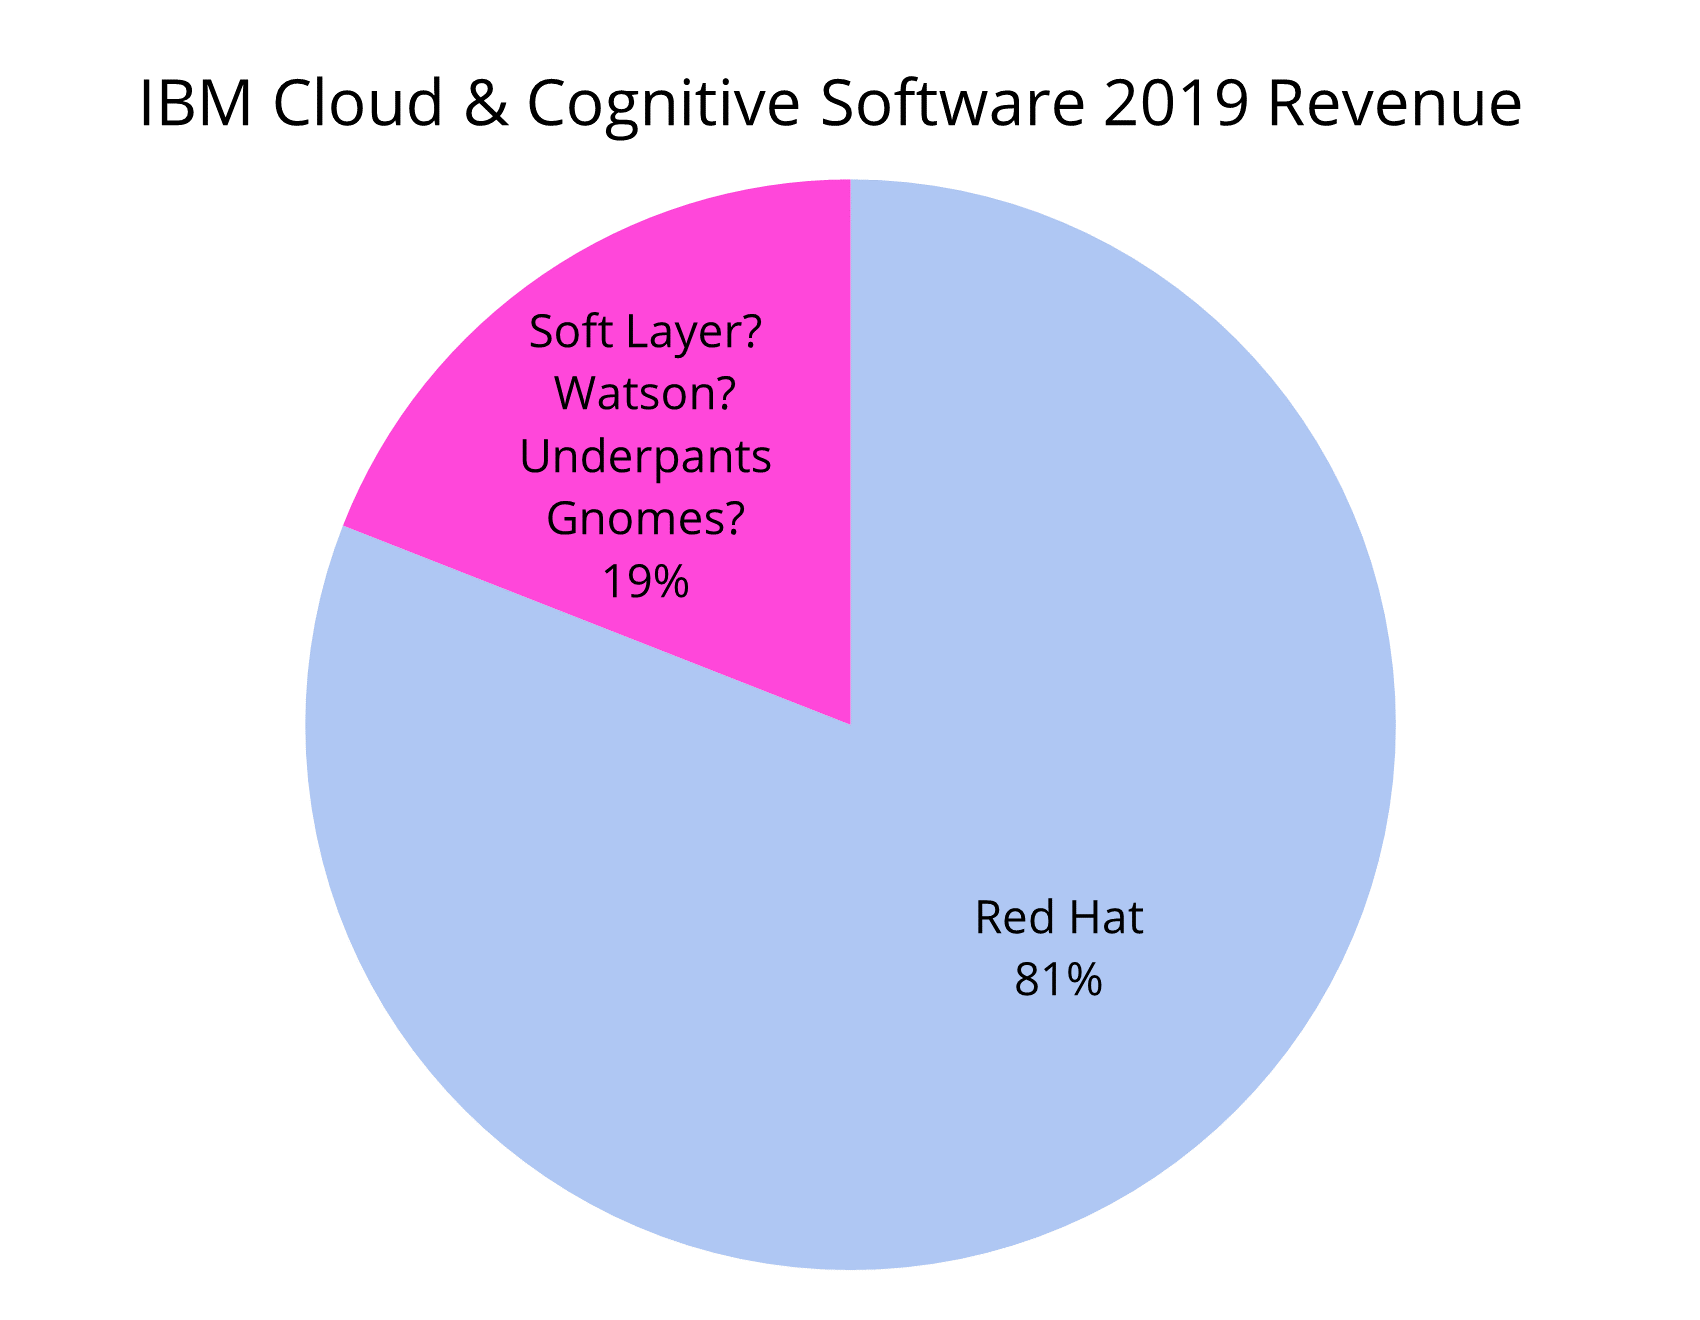 A pie chart showing IBM&rsquo;s Cloud and Cognitive revenue in 2019. 81% for Red Hat and 19% for SoftLayer? Watson? Underpants Gnomes?